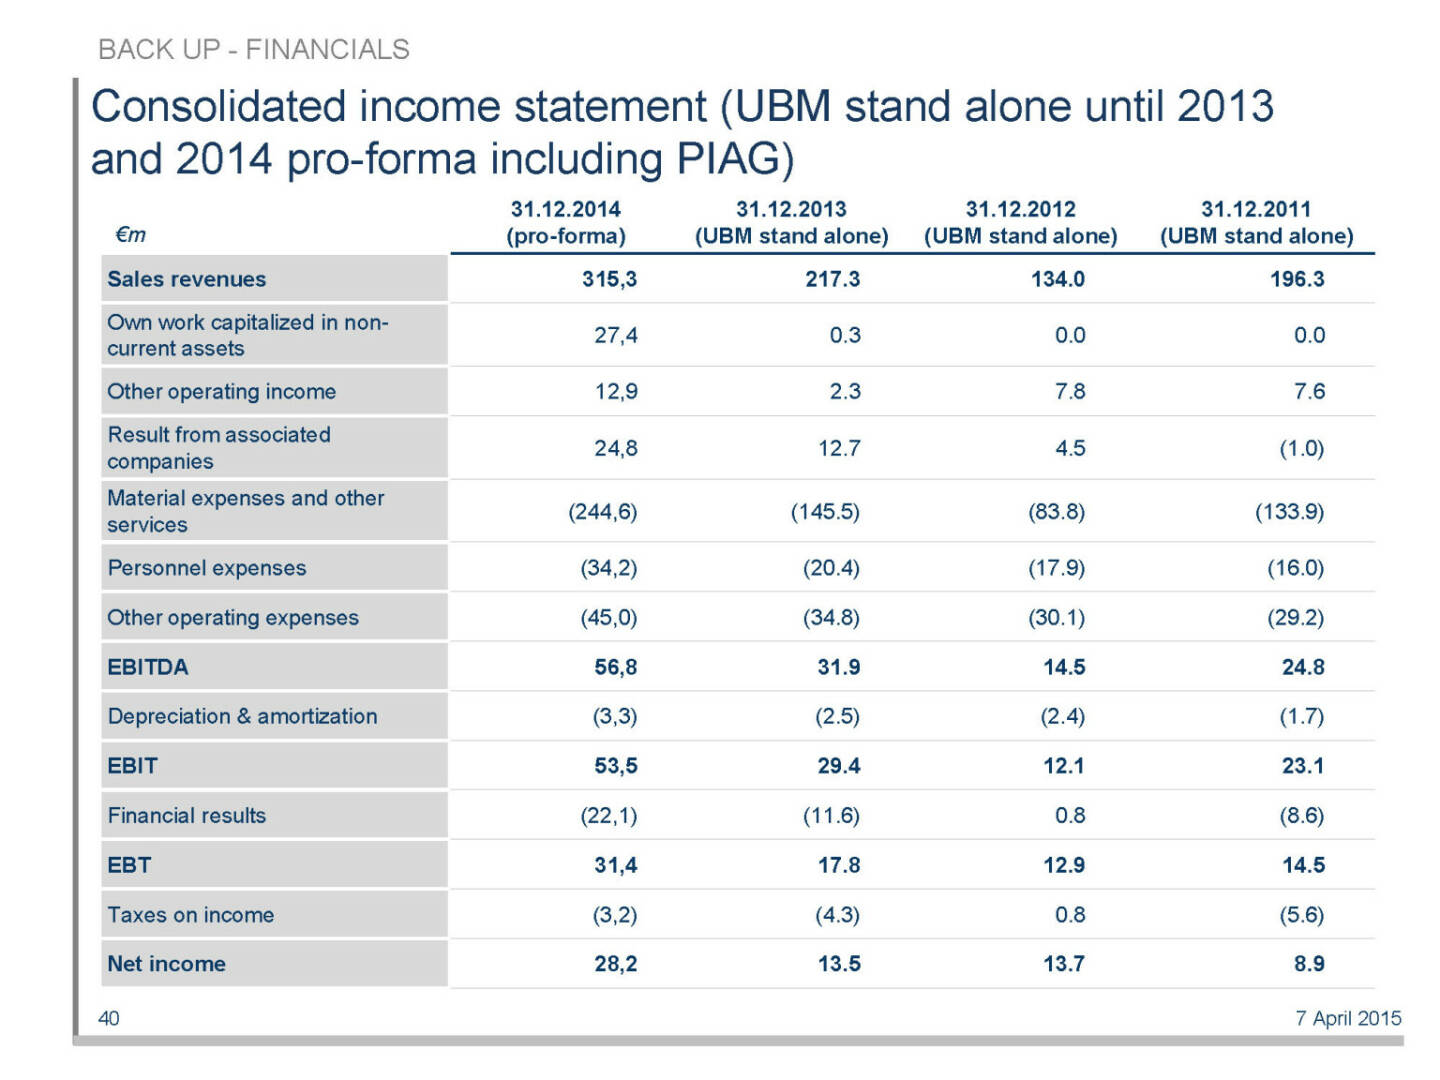 Consolidated income statement (UBM stand alone until 2013 and 2014 pro-forma including PIAG)